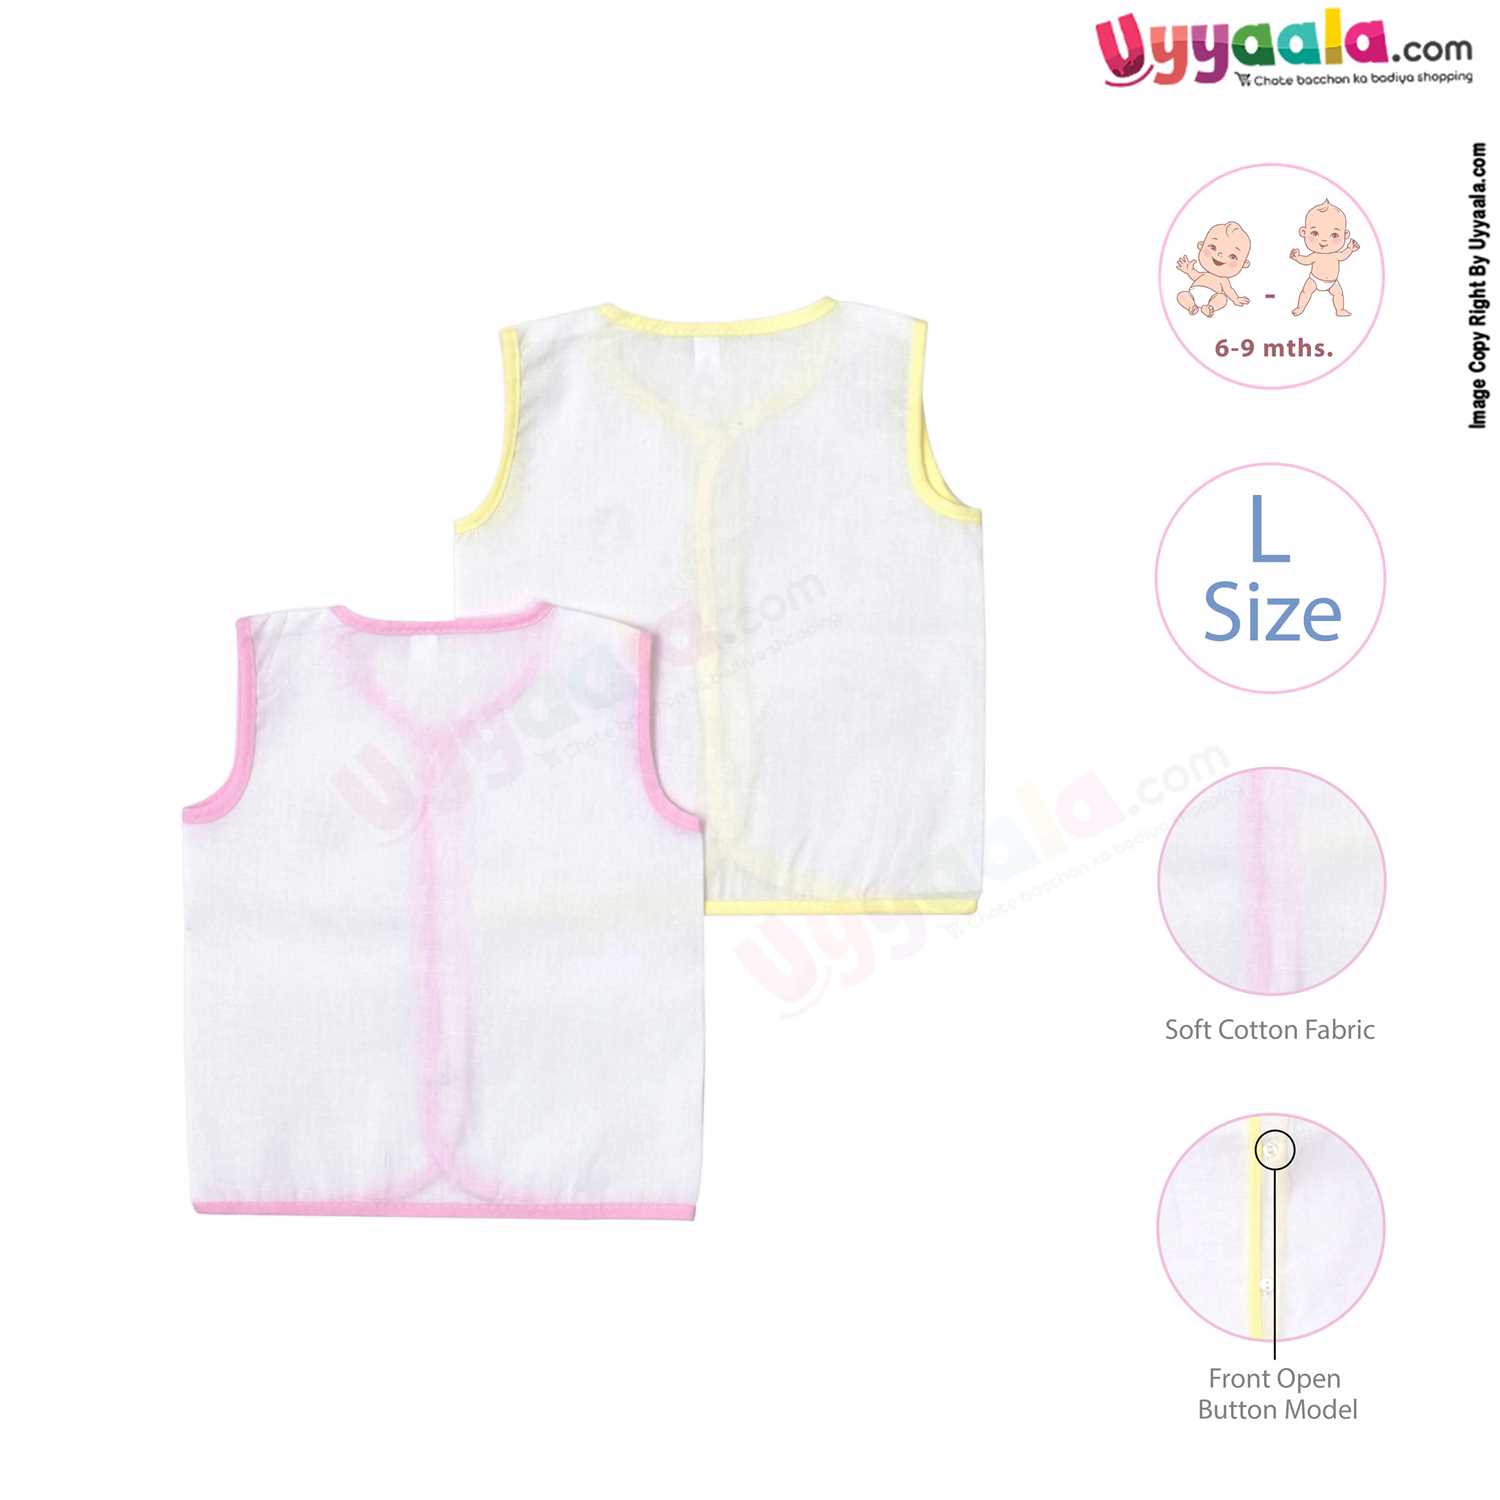 POLAR CUBS Sleeveless Baby Jabla Set, Front Opening Button Model, Premium Quality Cotton Baby Wear, (6-9M), 2Pack - White with Pink & Yellow Borders